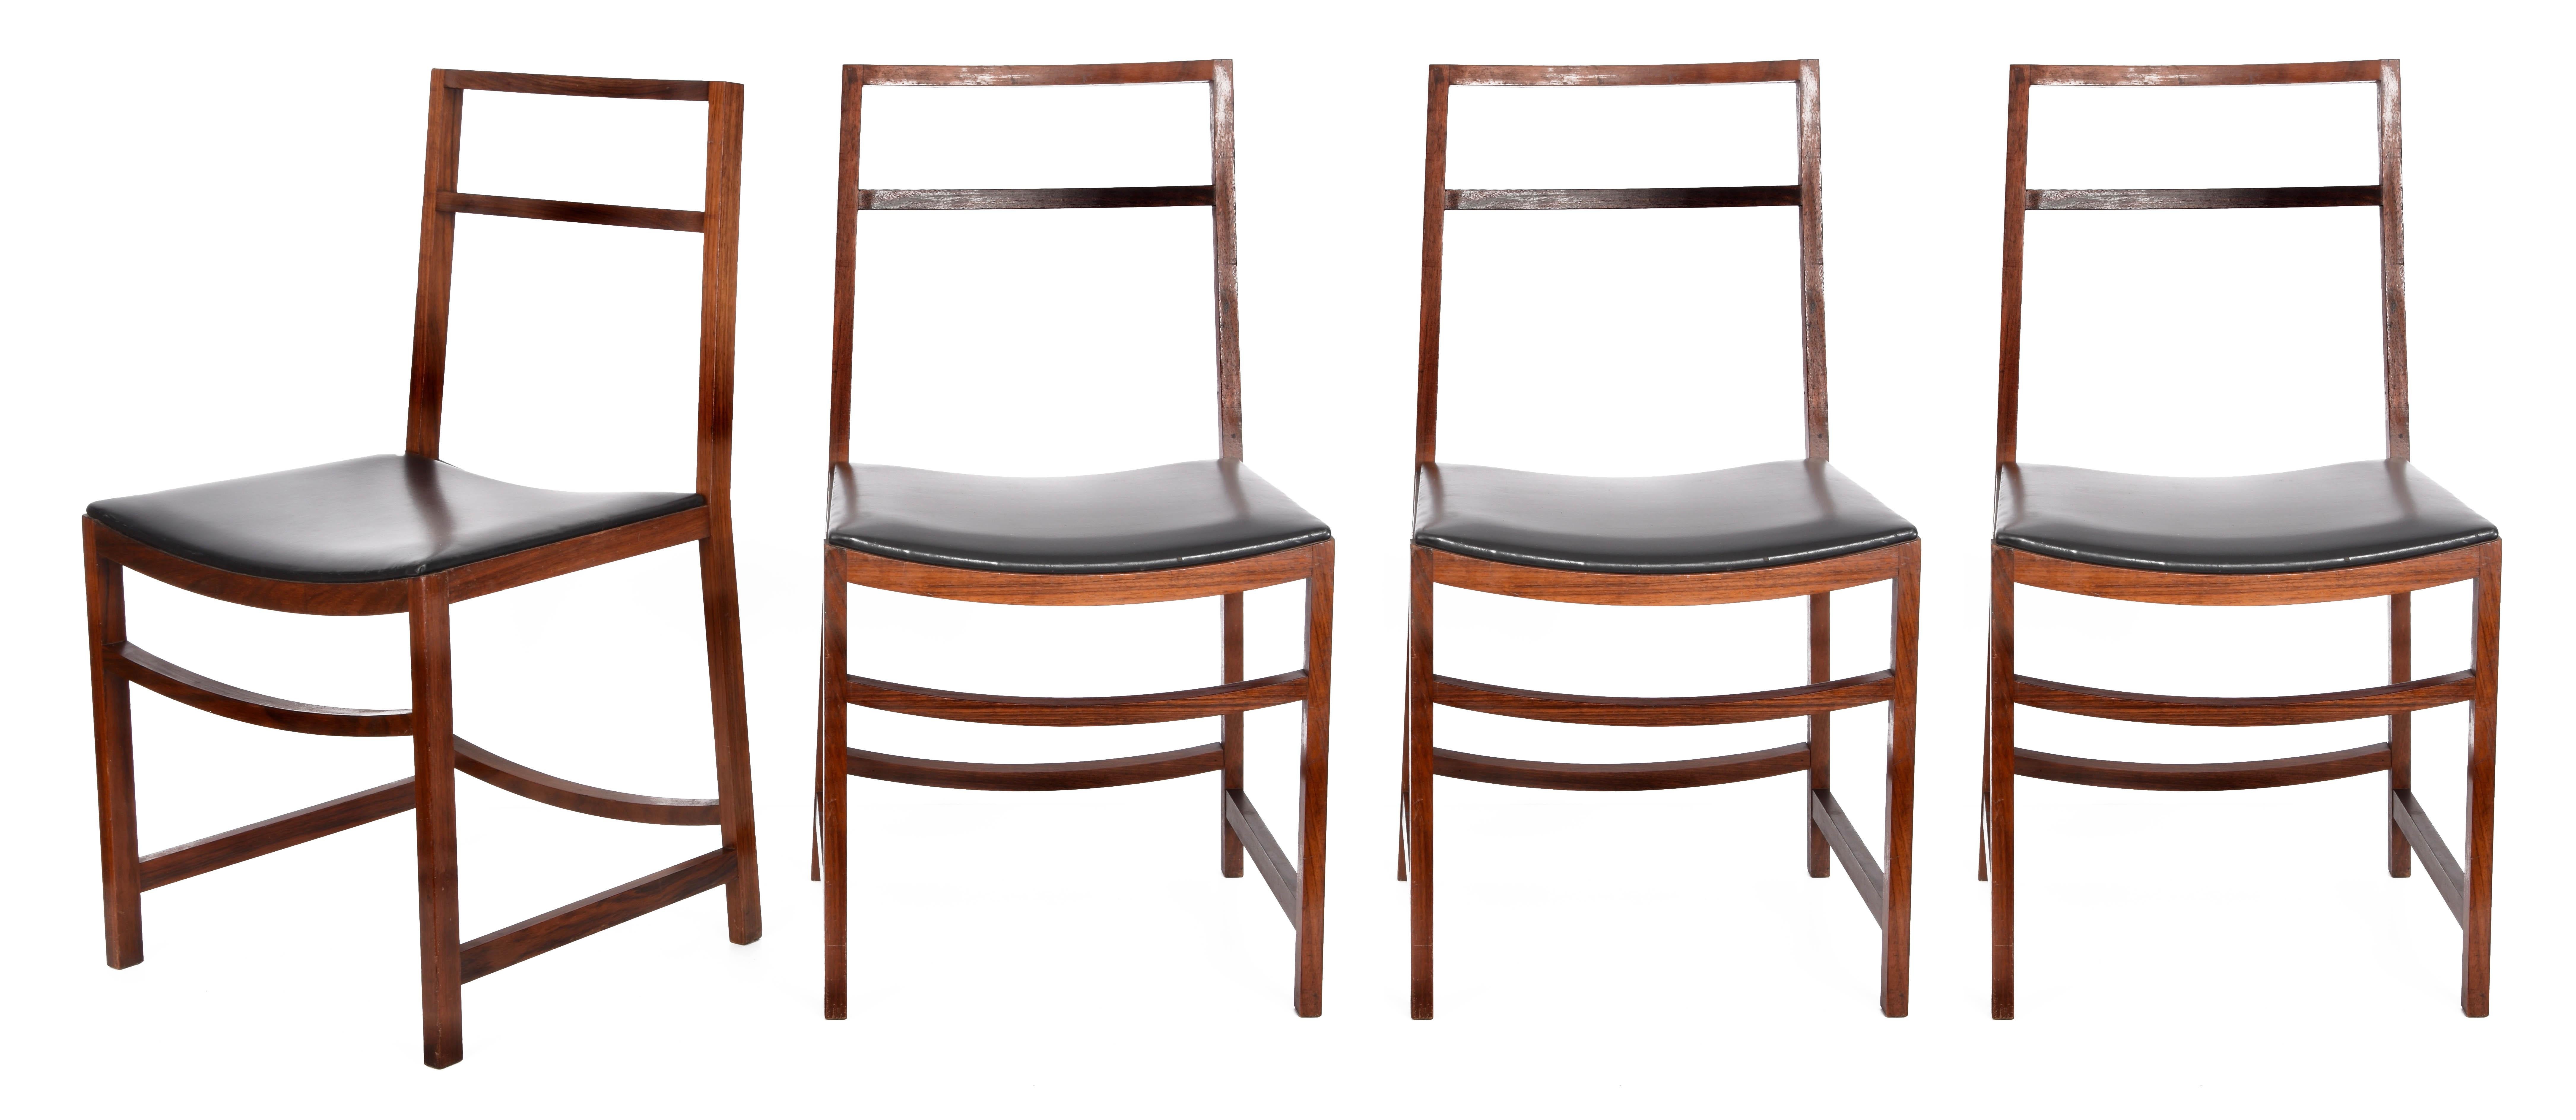 Amazing set of 4 midcentury wood and faux leather chairs. This amazing set was designed by Renato Venturi for MIM in Italy during 1960s.

This great set is made of light and solid wooded chairs and wonderfully black faux leather.

The set comes